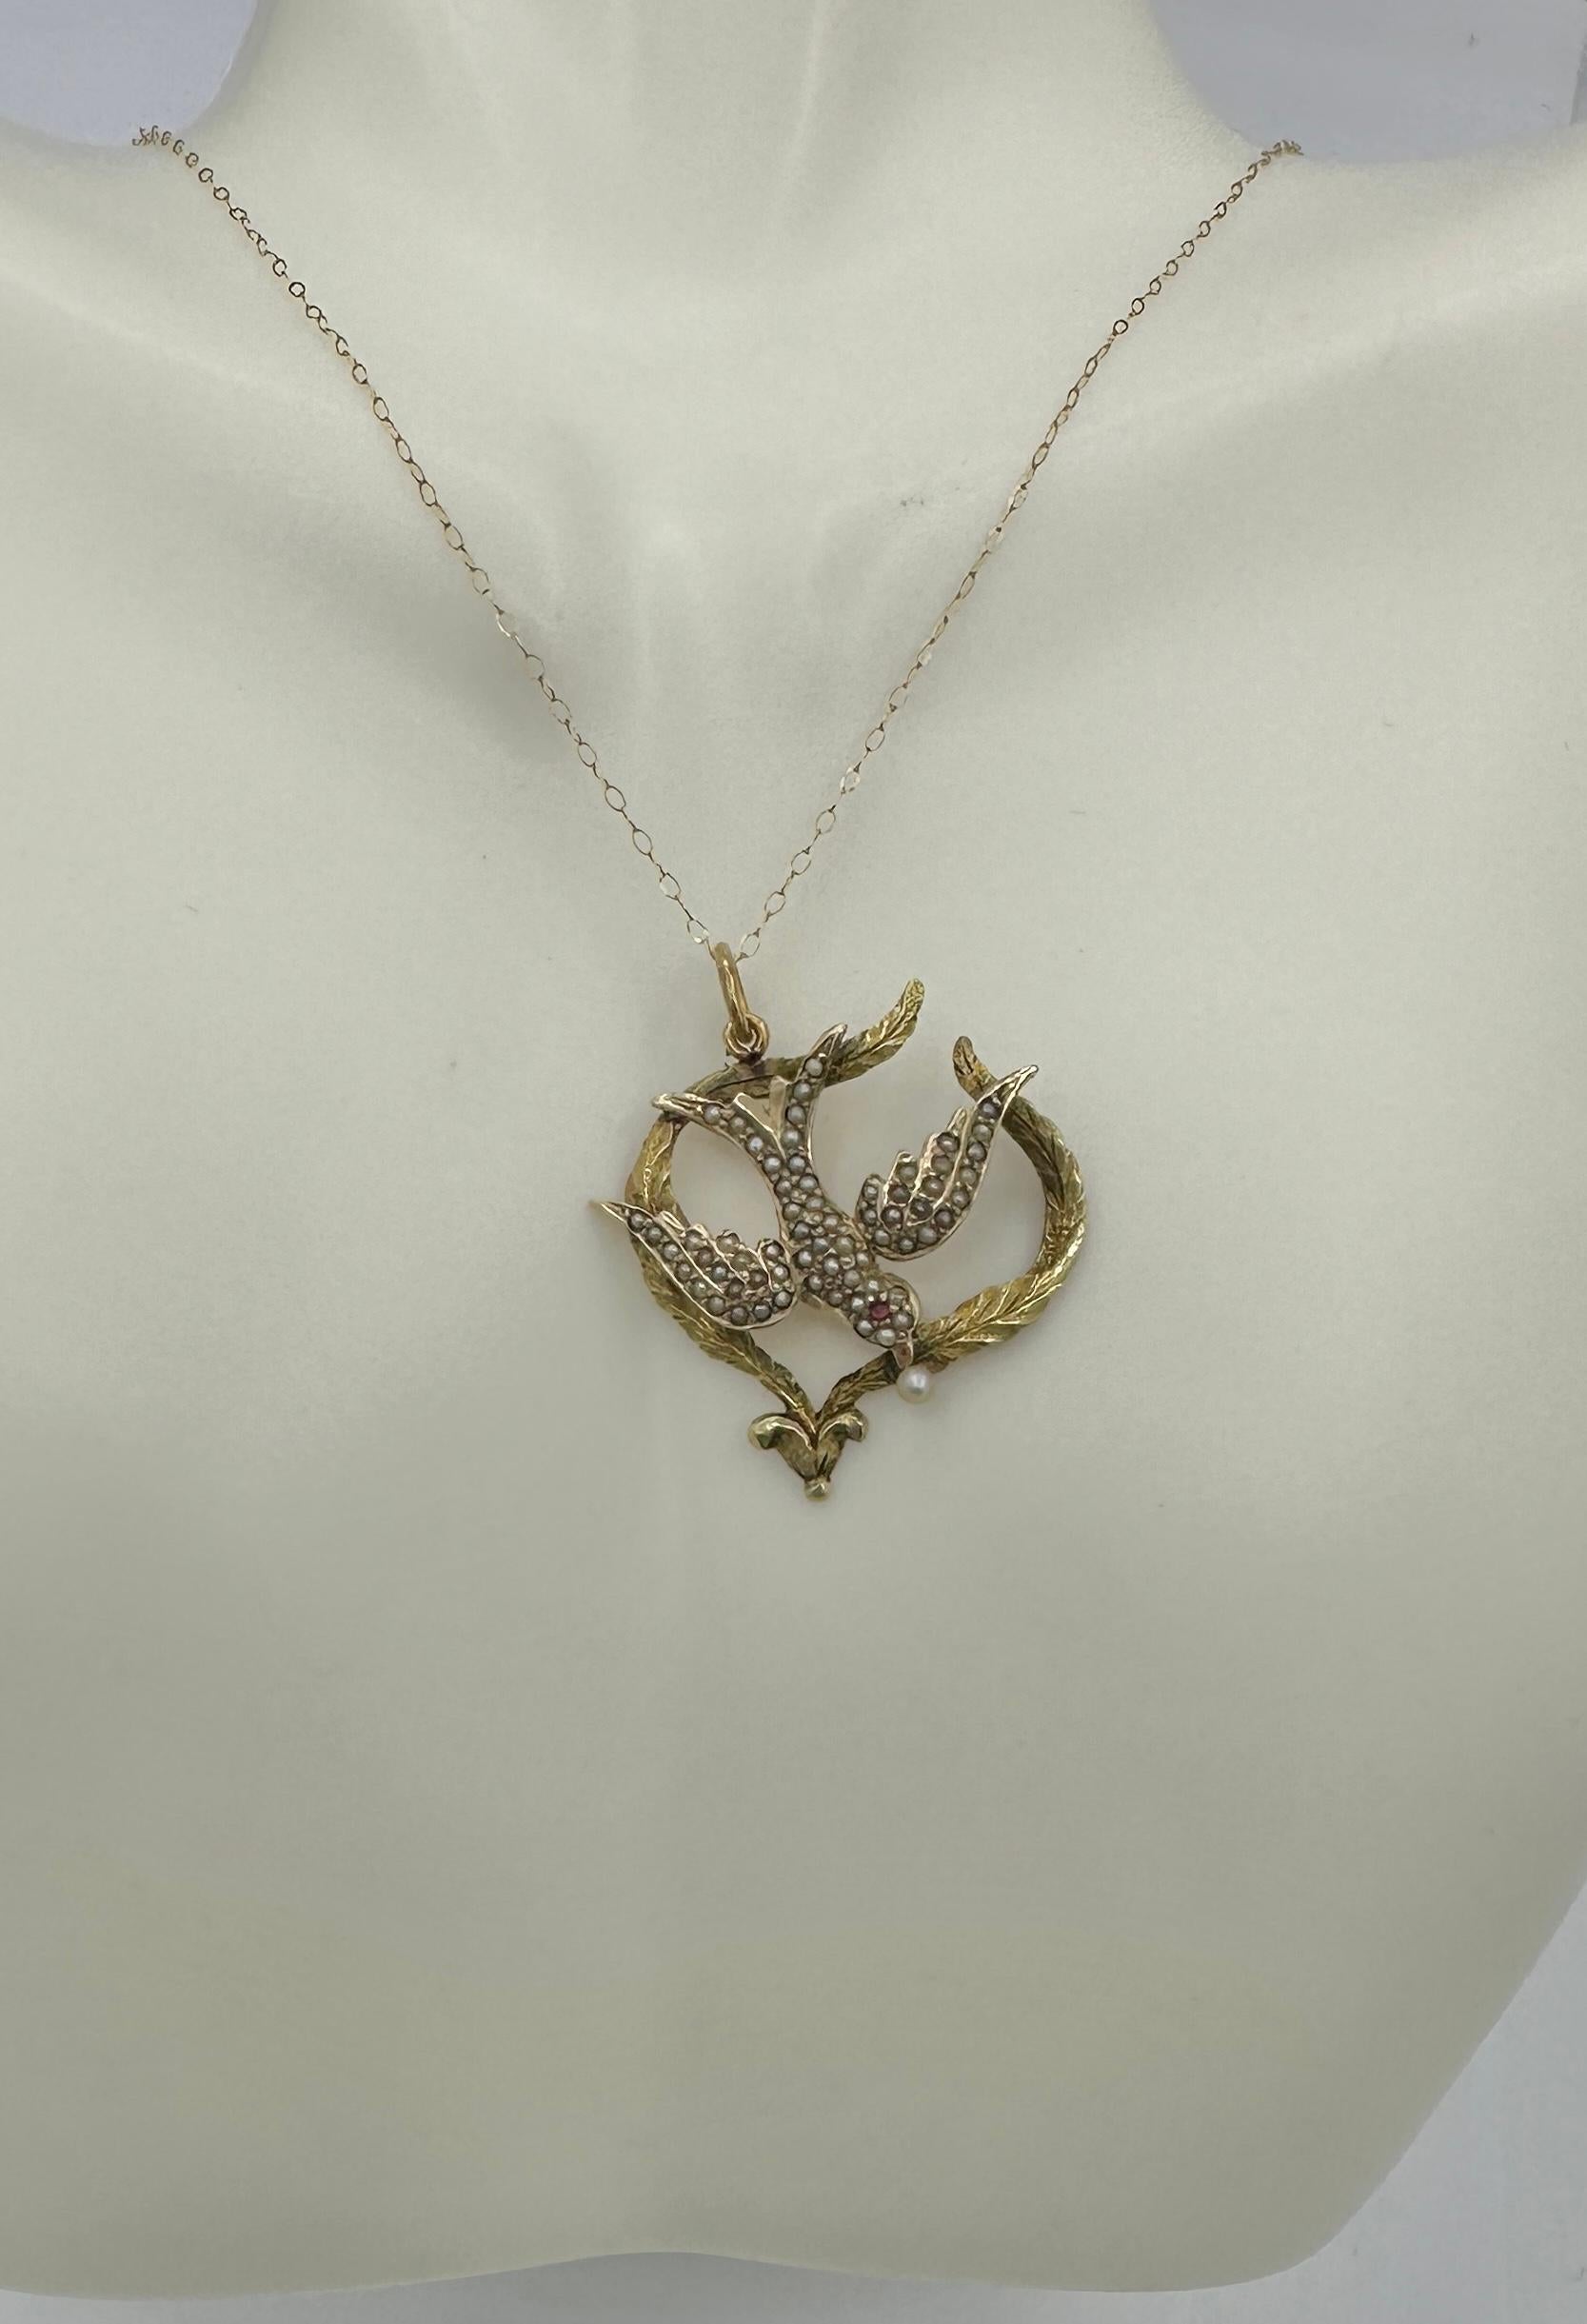 This is a gorgeous antique Victorian Dove Swallow Bird of Peace Pendant Necklace adorned with a Pearl in it its mouth, a Ruby eye, and seed pearls throughout creating the white feathers of the dove.  The lavaliere pendant has an extraordinary